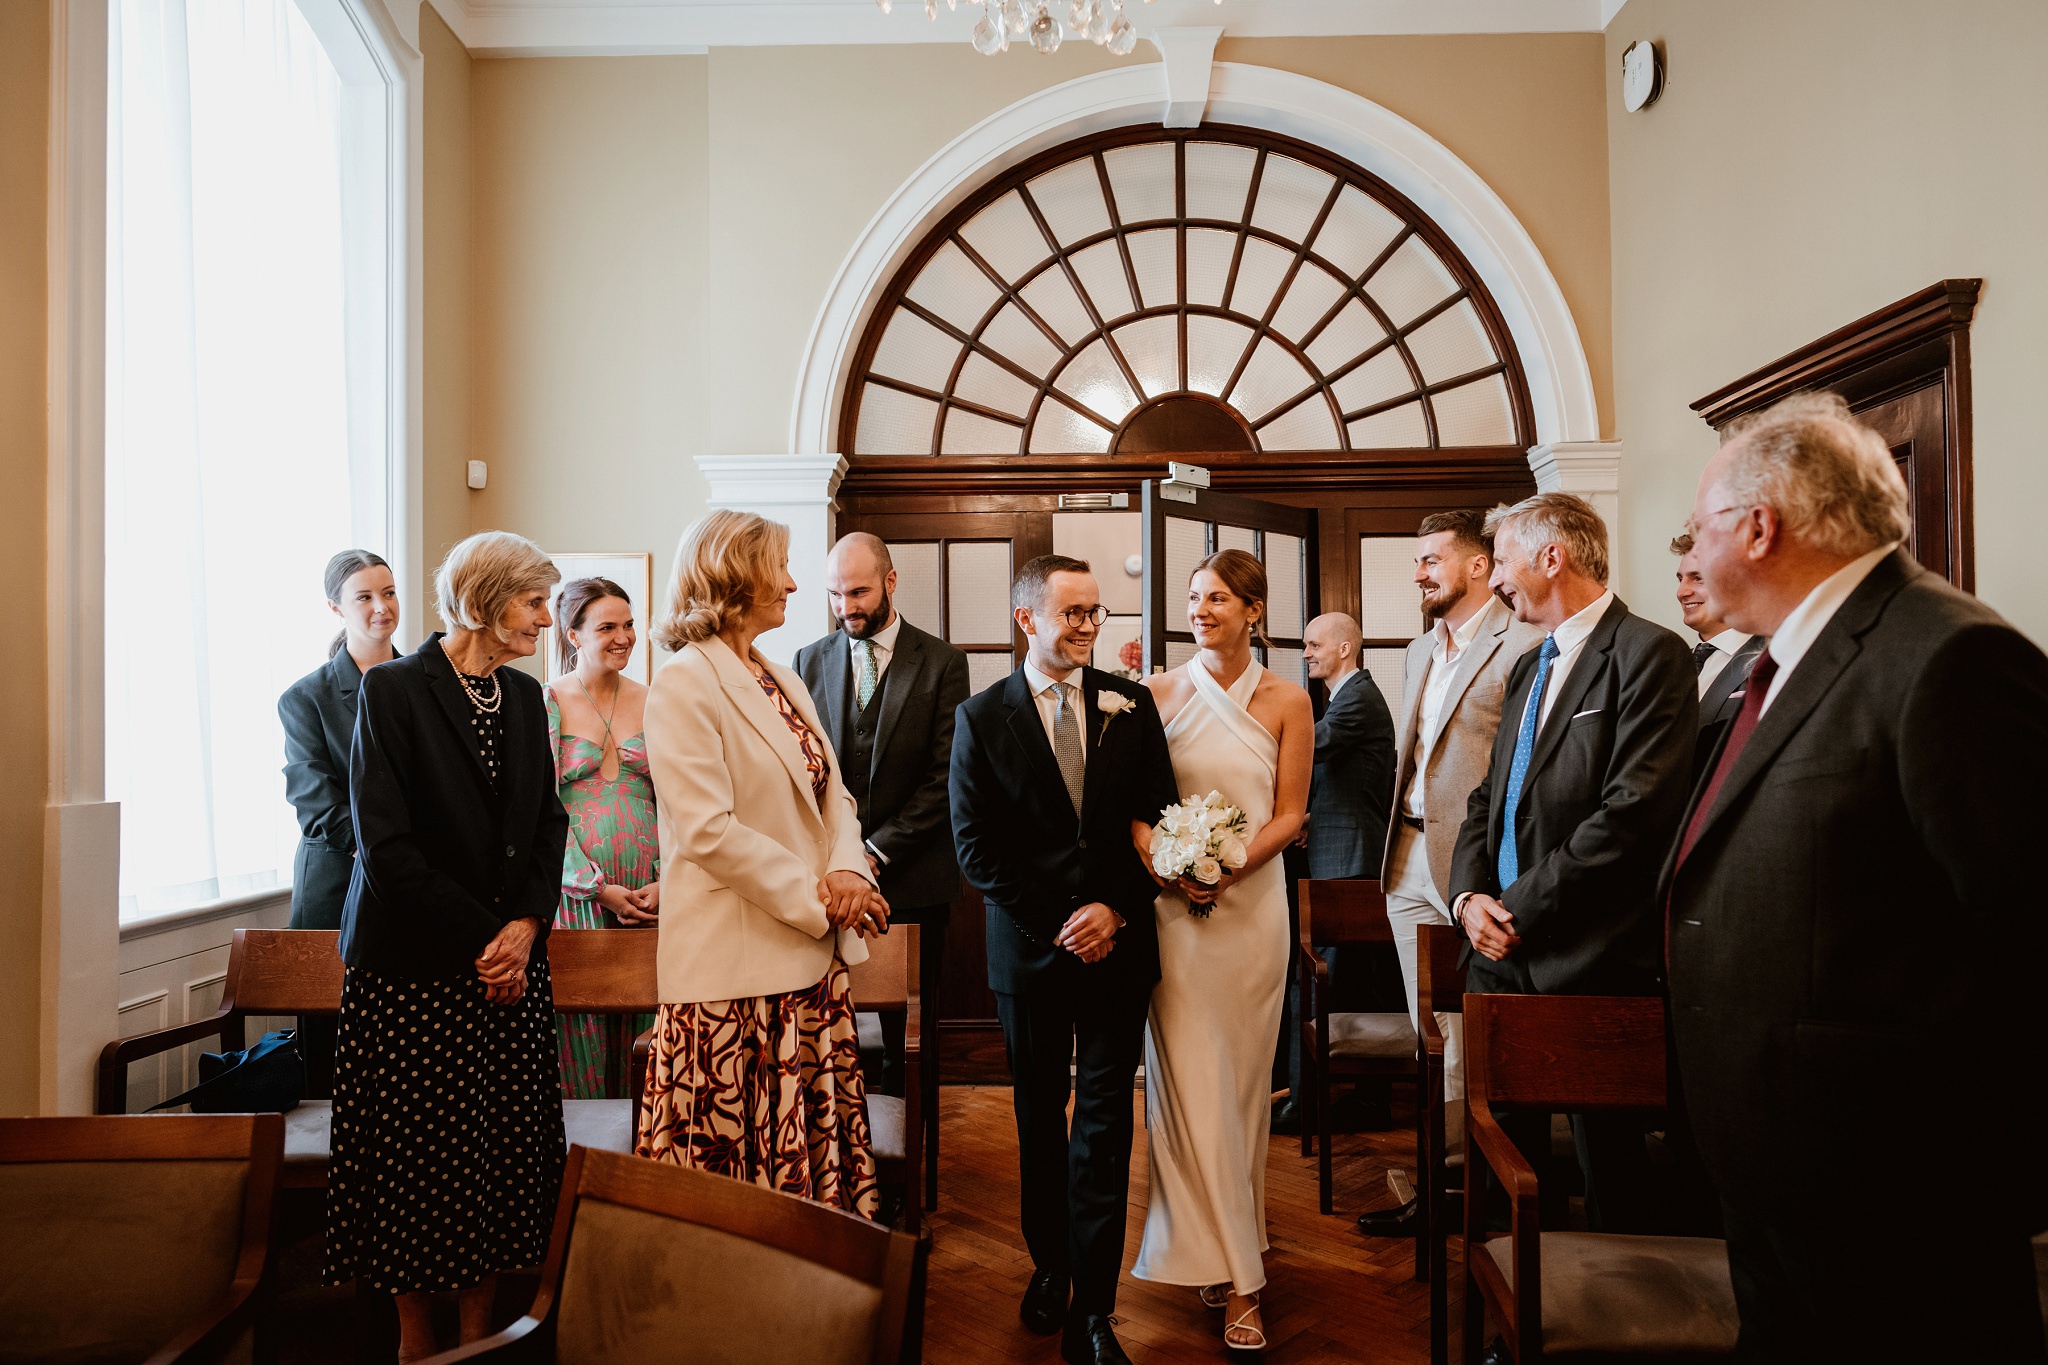 walking down the aisle together - Chelsea Town Hall Wedding Photography